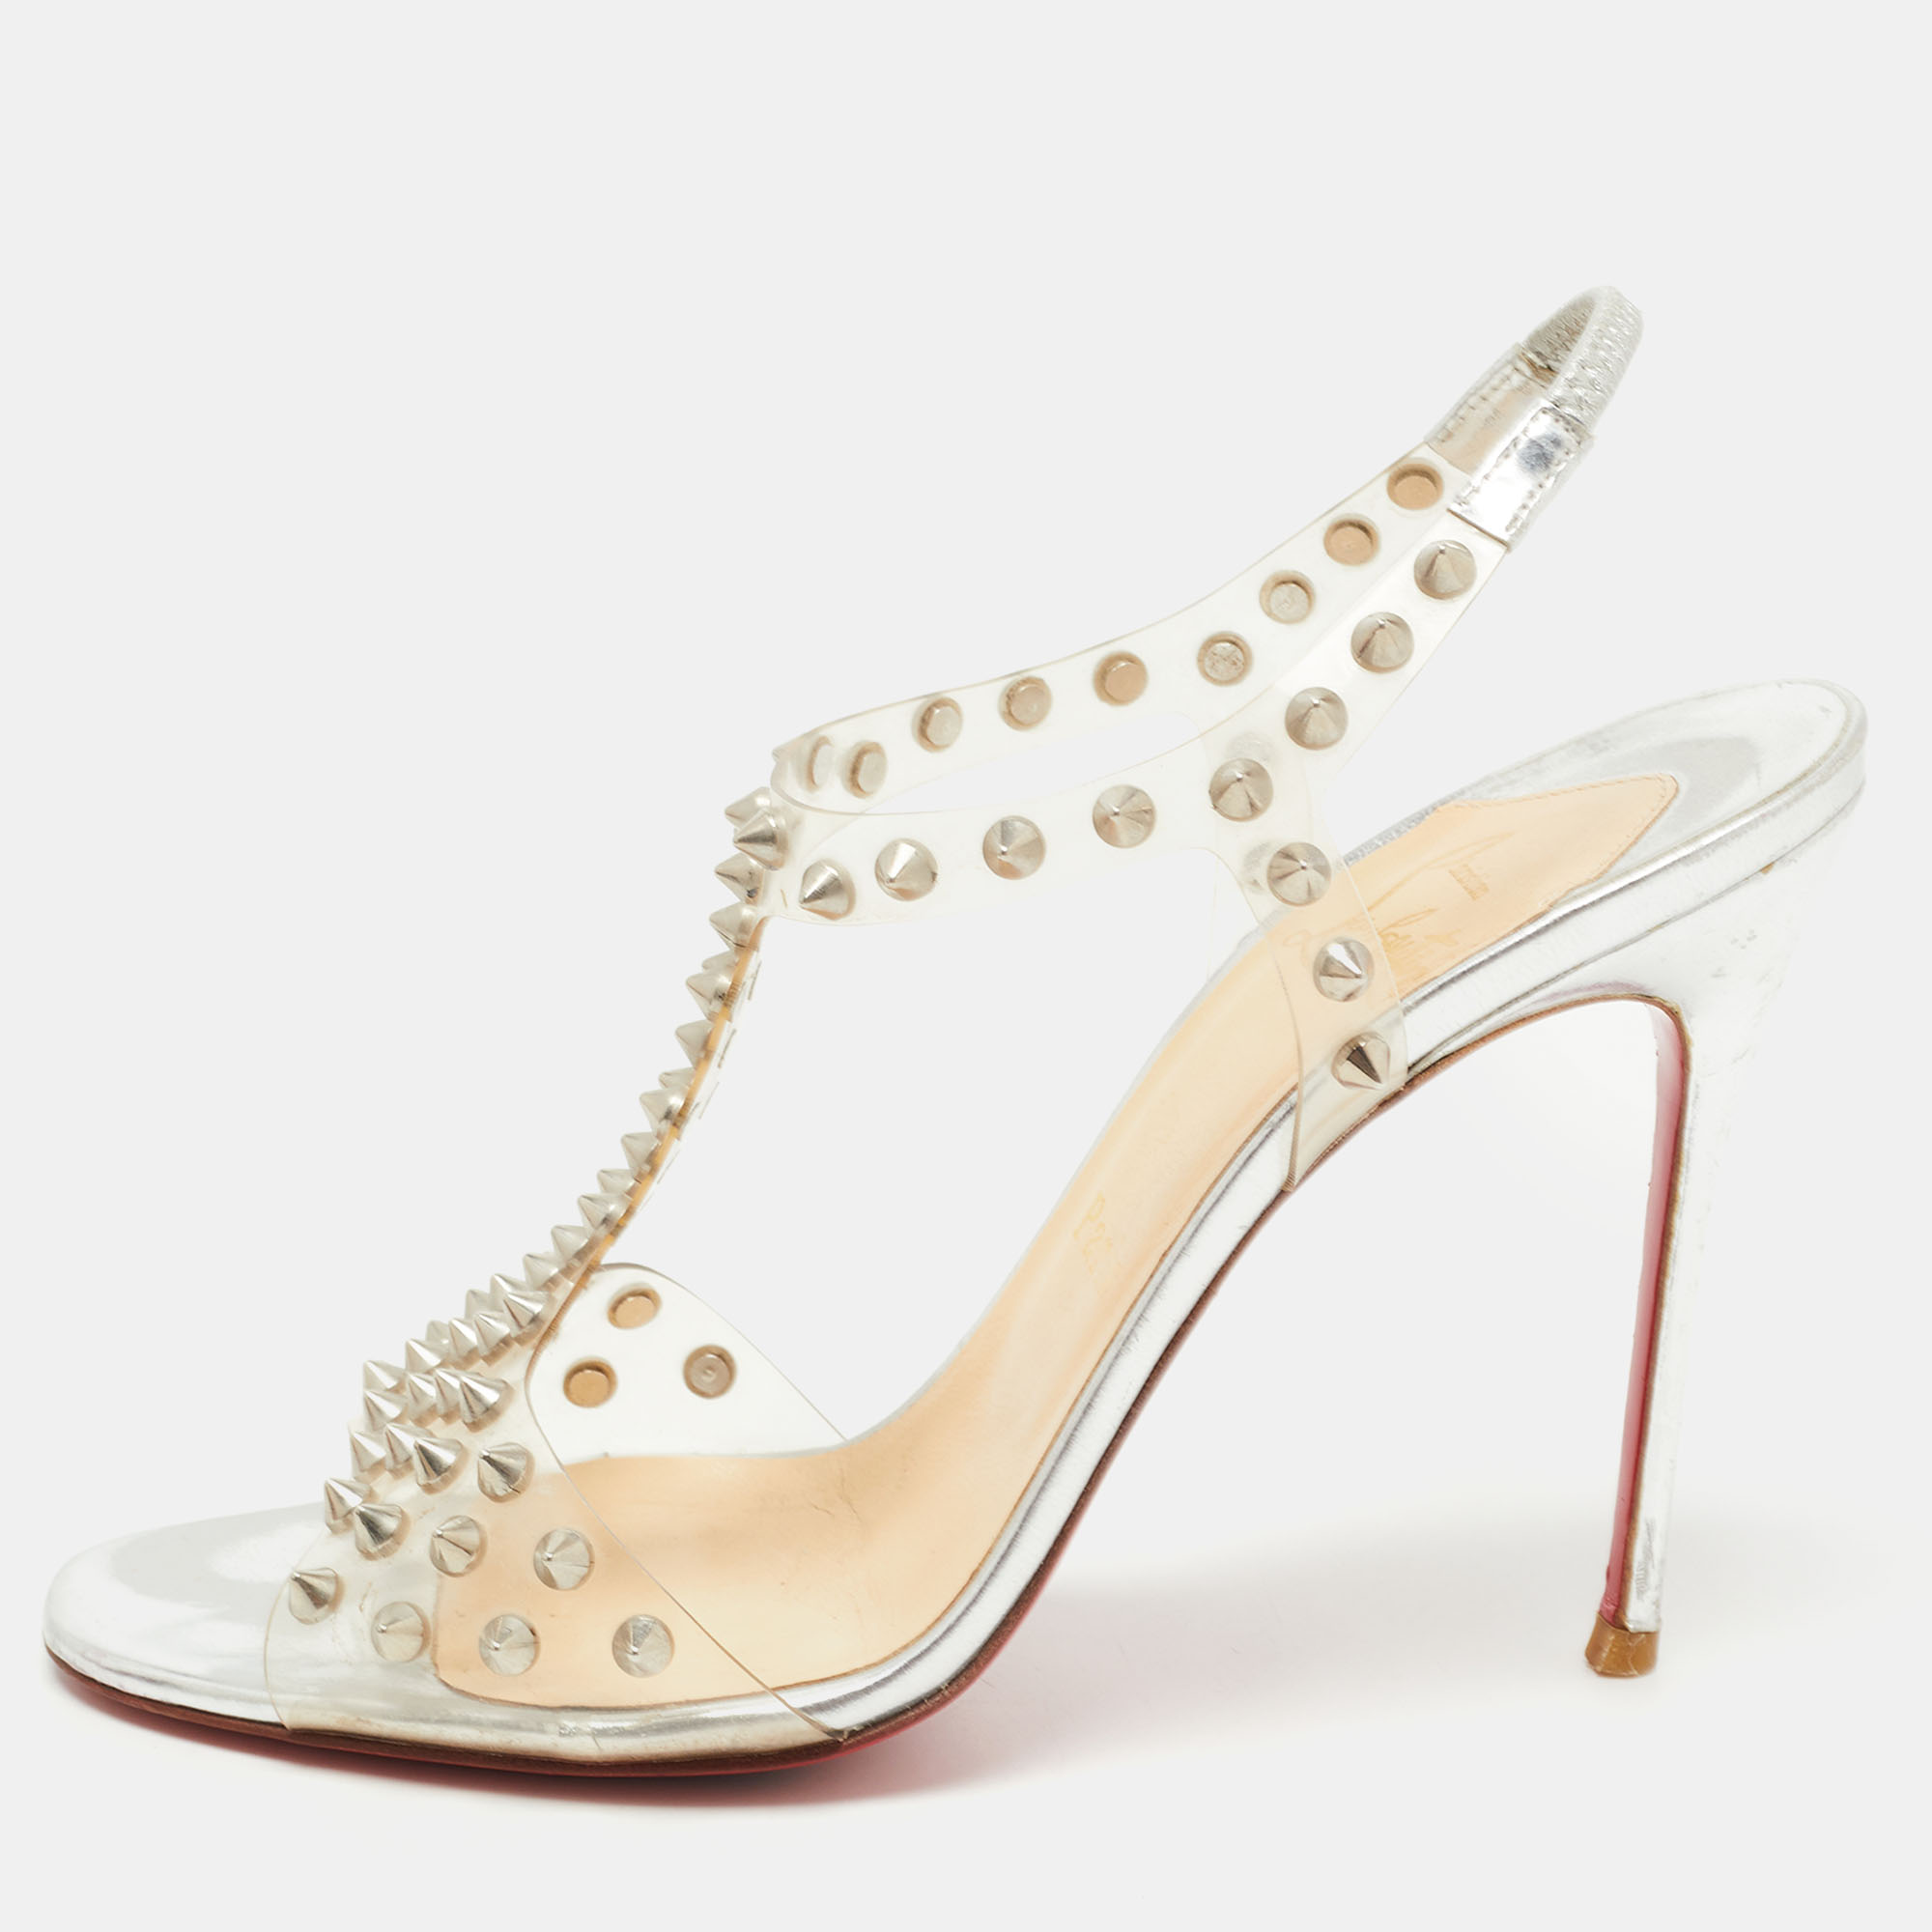 Pre-owned Christian Louboutin Transparent Spiked Pvc J-lissimo T Strap Sandals Size 37